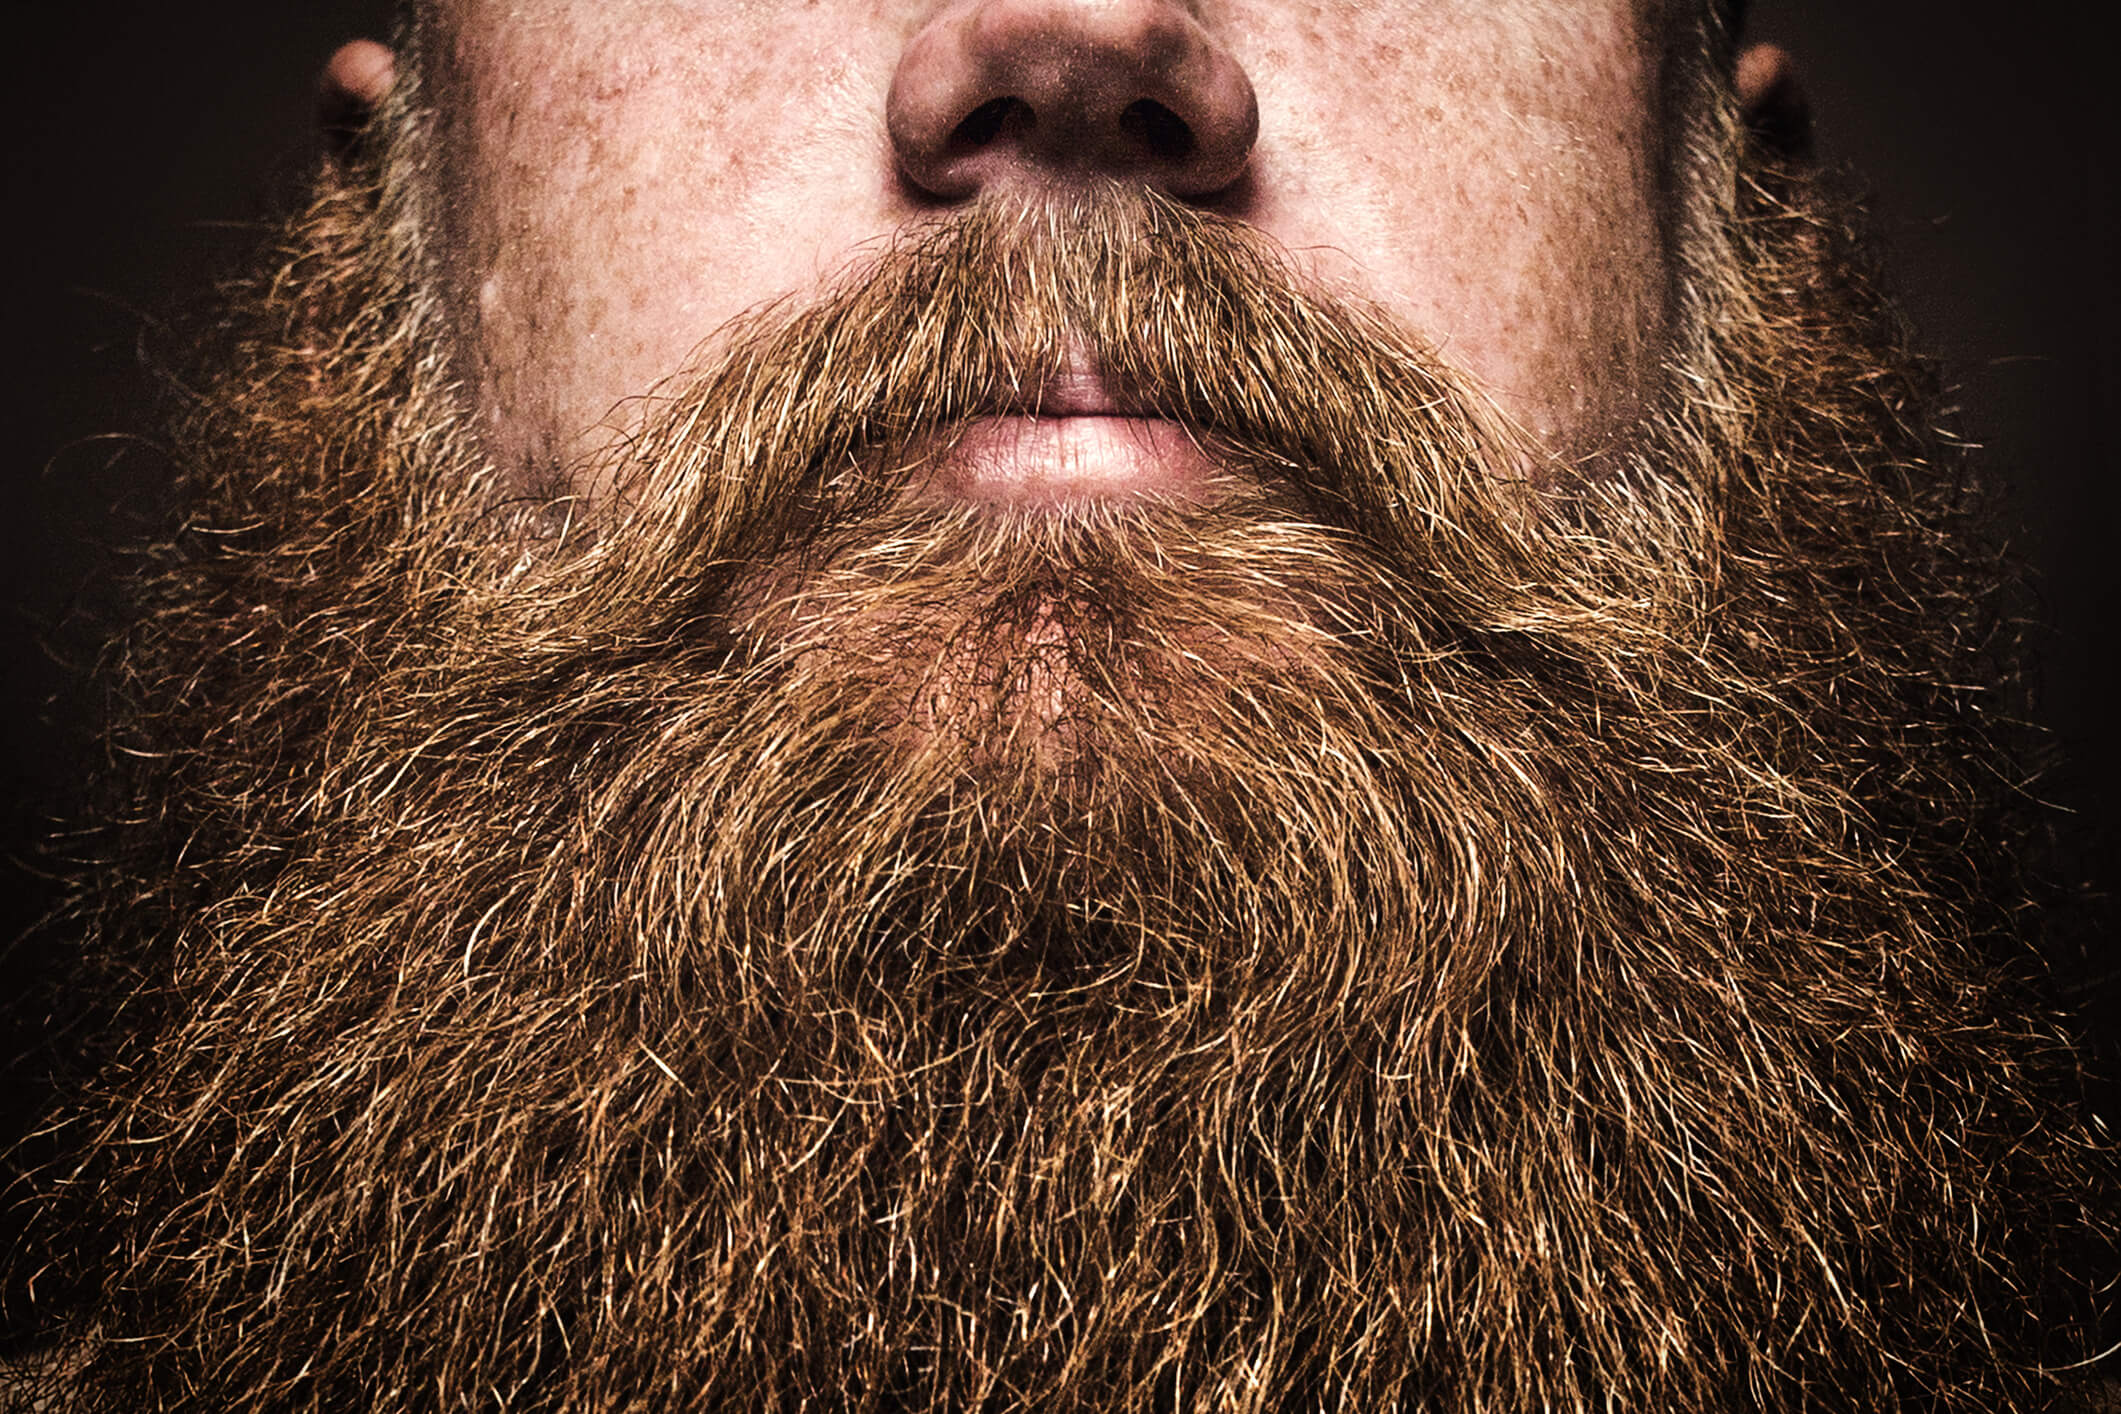 A close up portrait of a mans large red beard, his facial hair filling the image frame. His face is obscured by the composition, emphasizing the masculine mustache and beard.